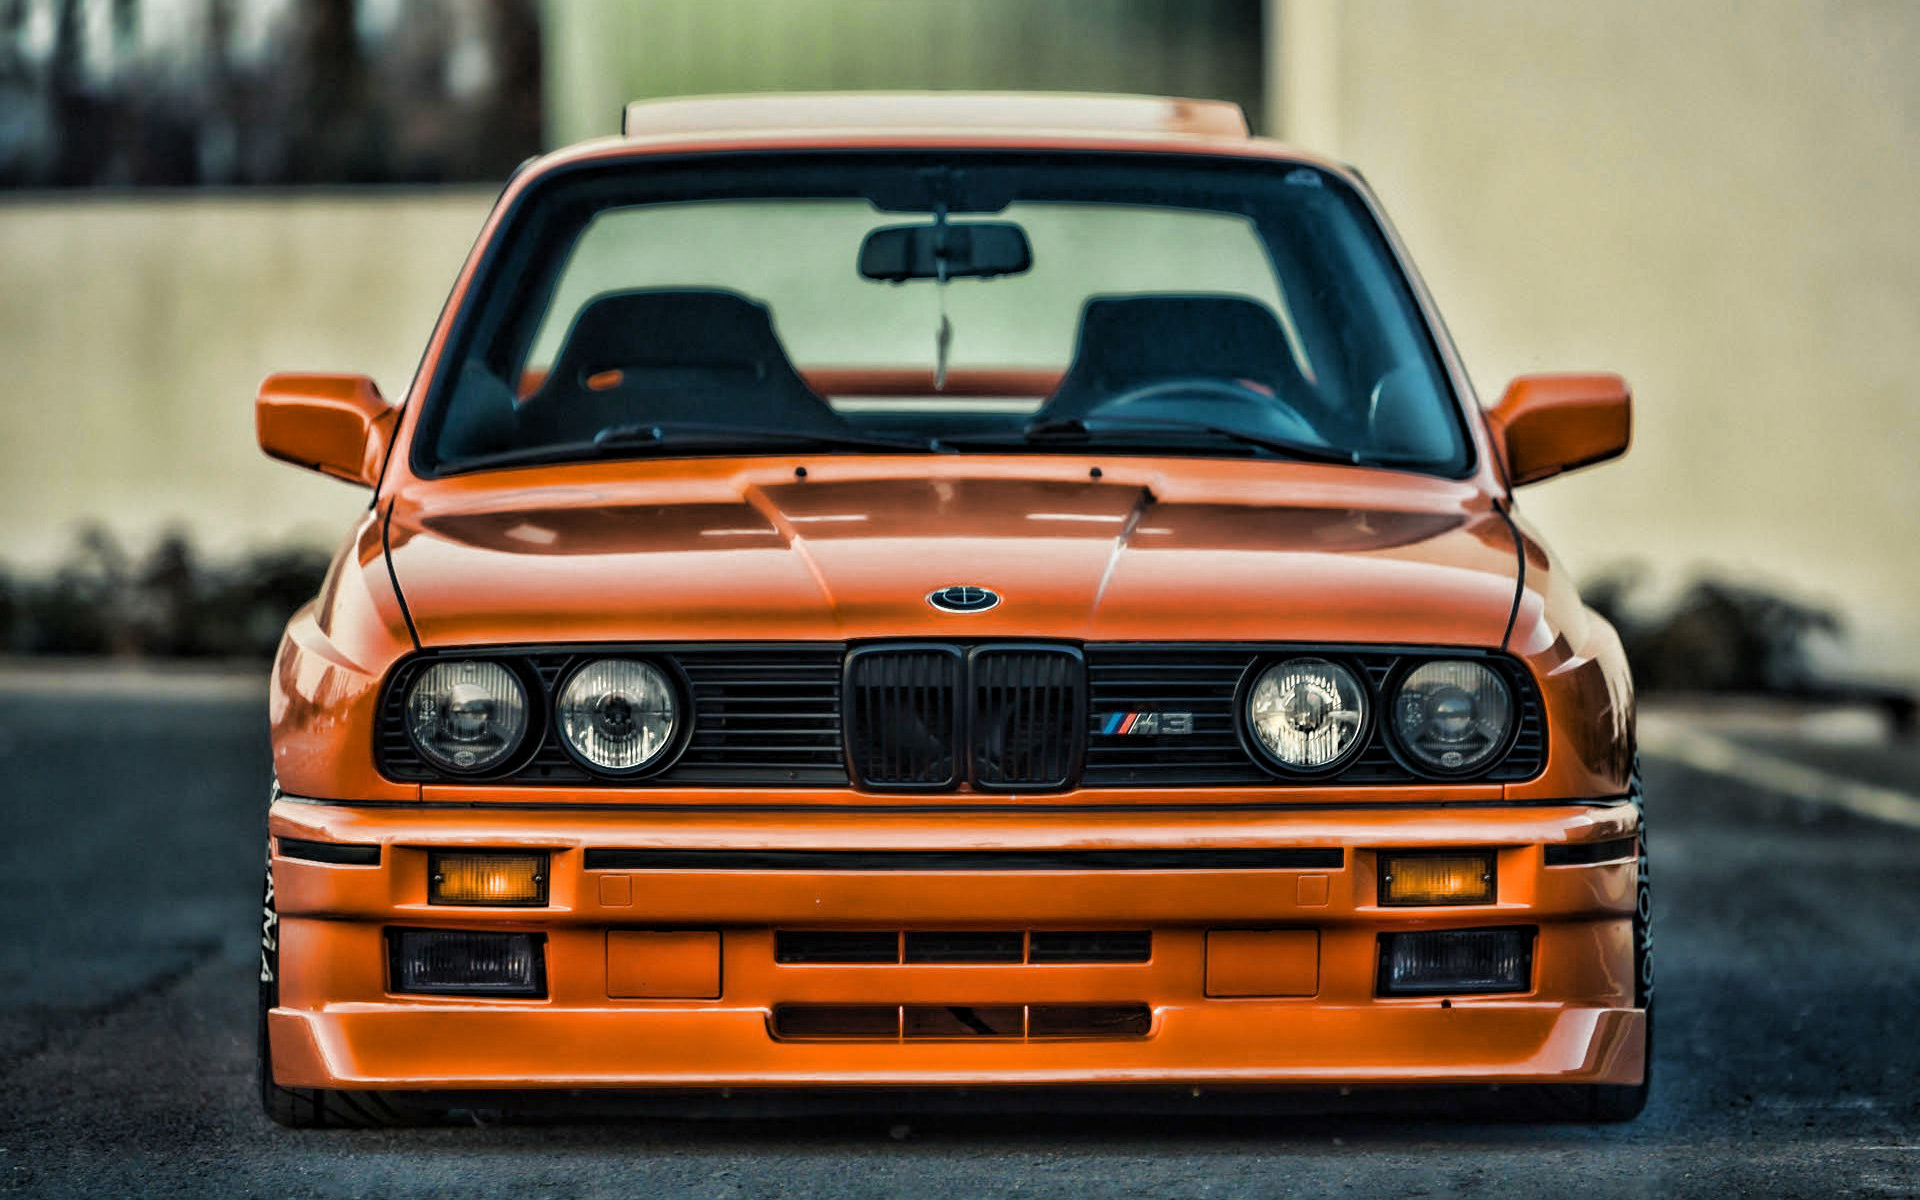 Bmw E30, Hdr, Tuning, E30, Stance, Bmw M3, Front View, - Bmw M3 E30 Tuning - HD Wallpaper 